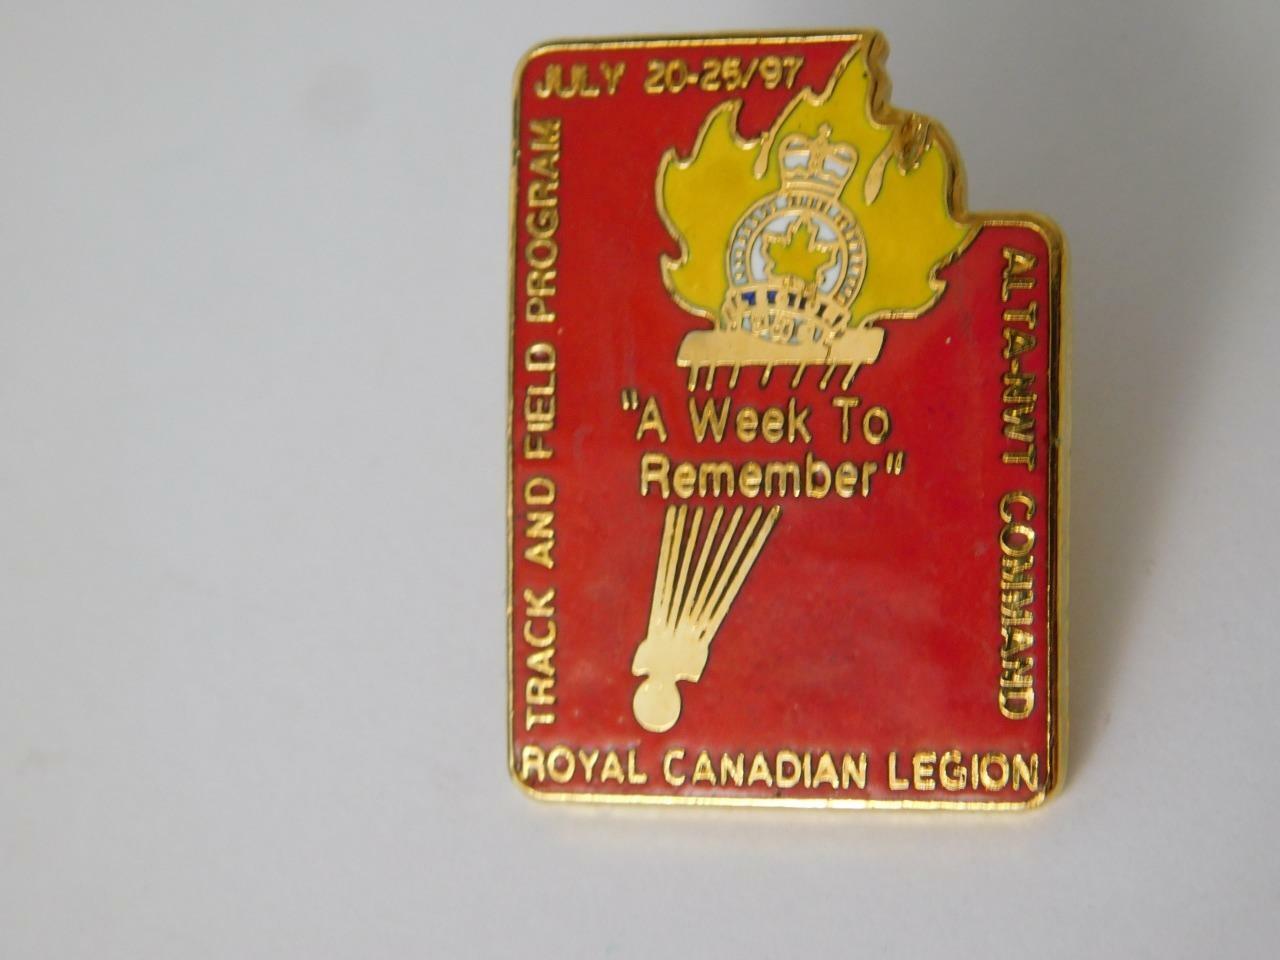 ROYAL CANADIAN LEGION PIN BUTTON 1997 TRACK AND FIELD PROGRAM ALTA NWT COMMAND